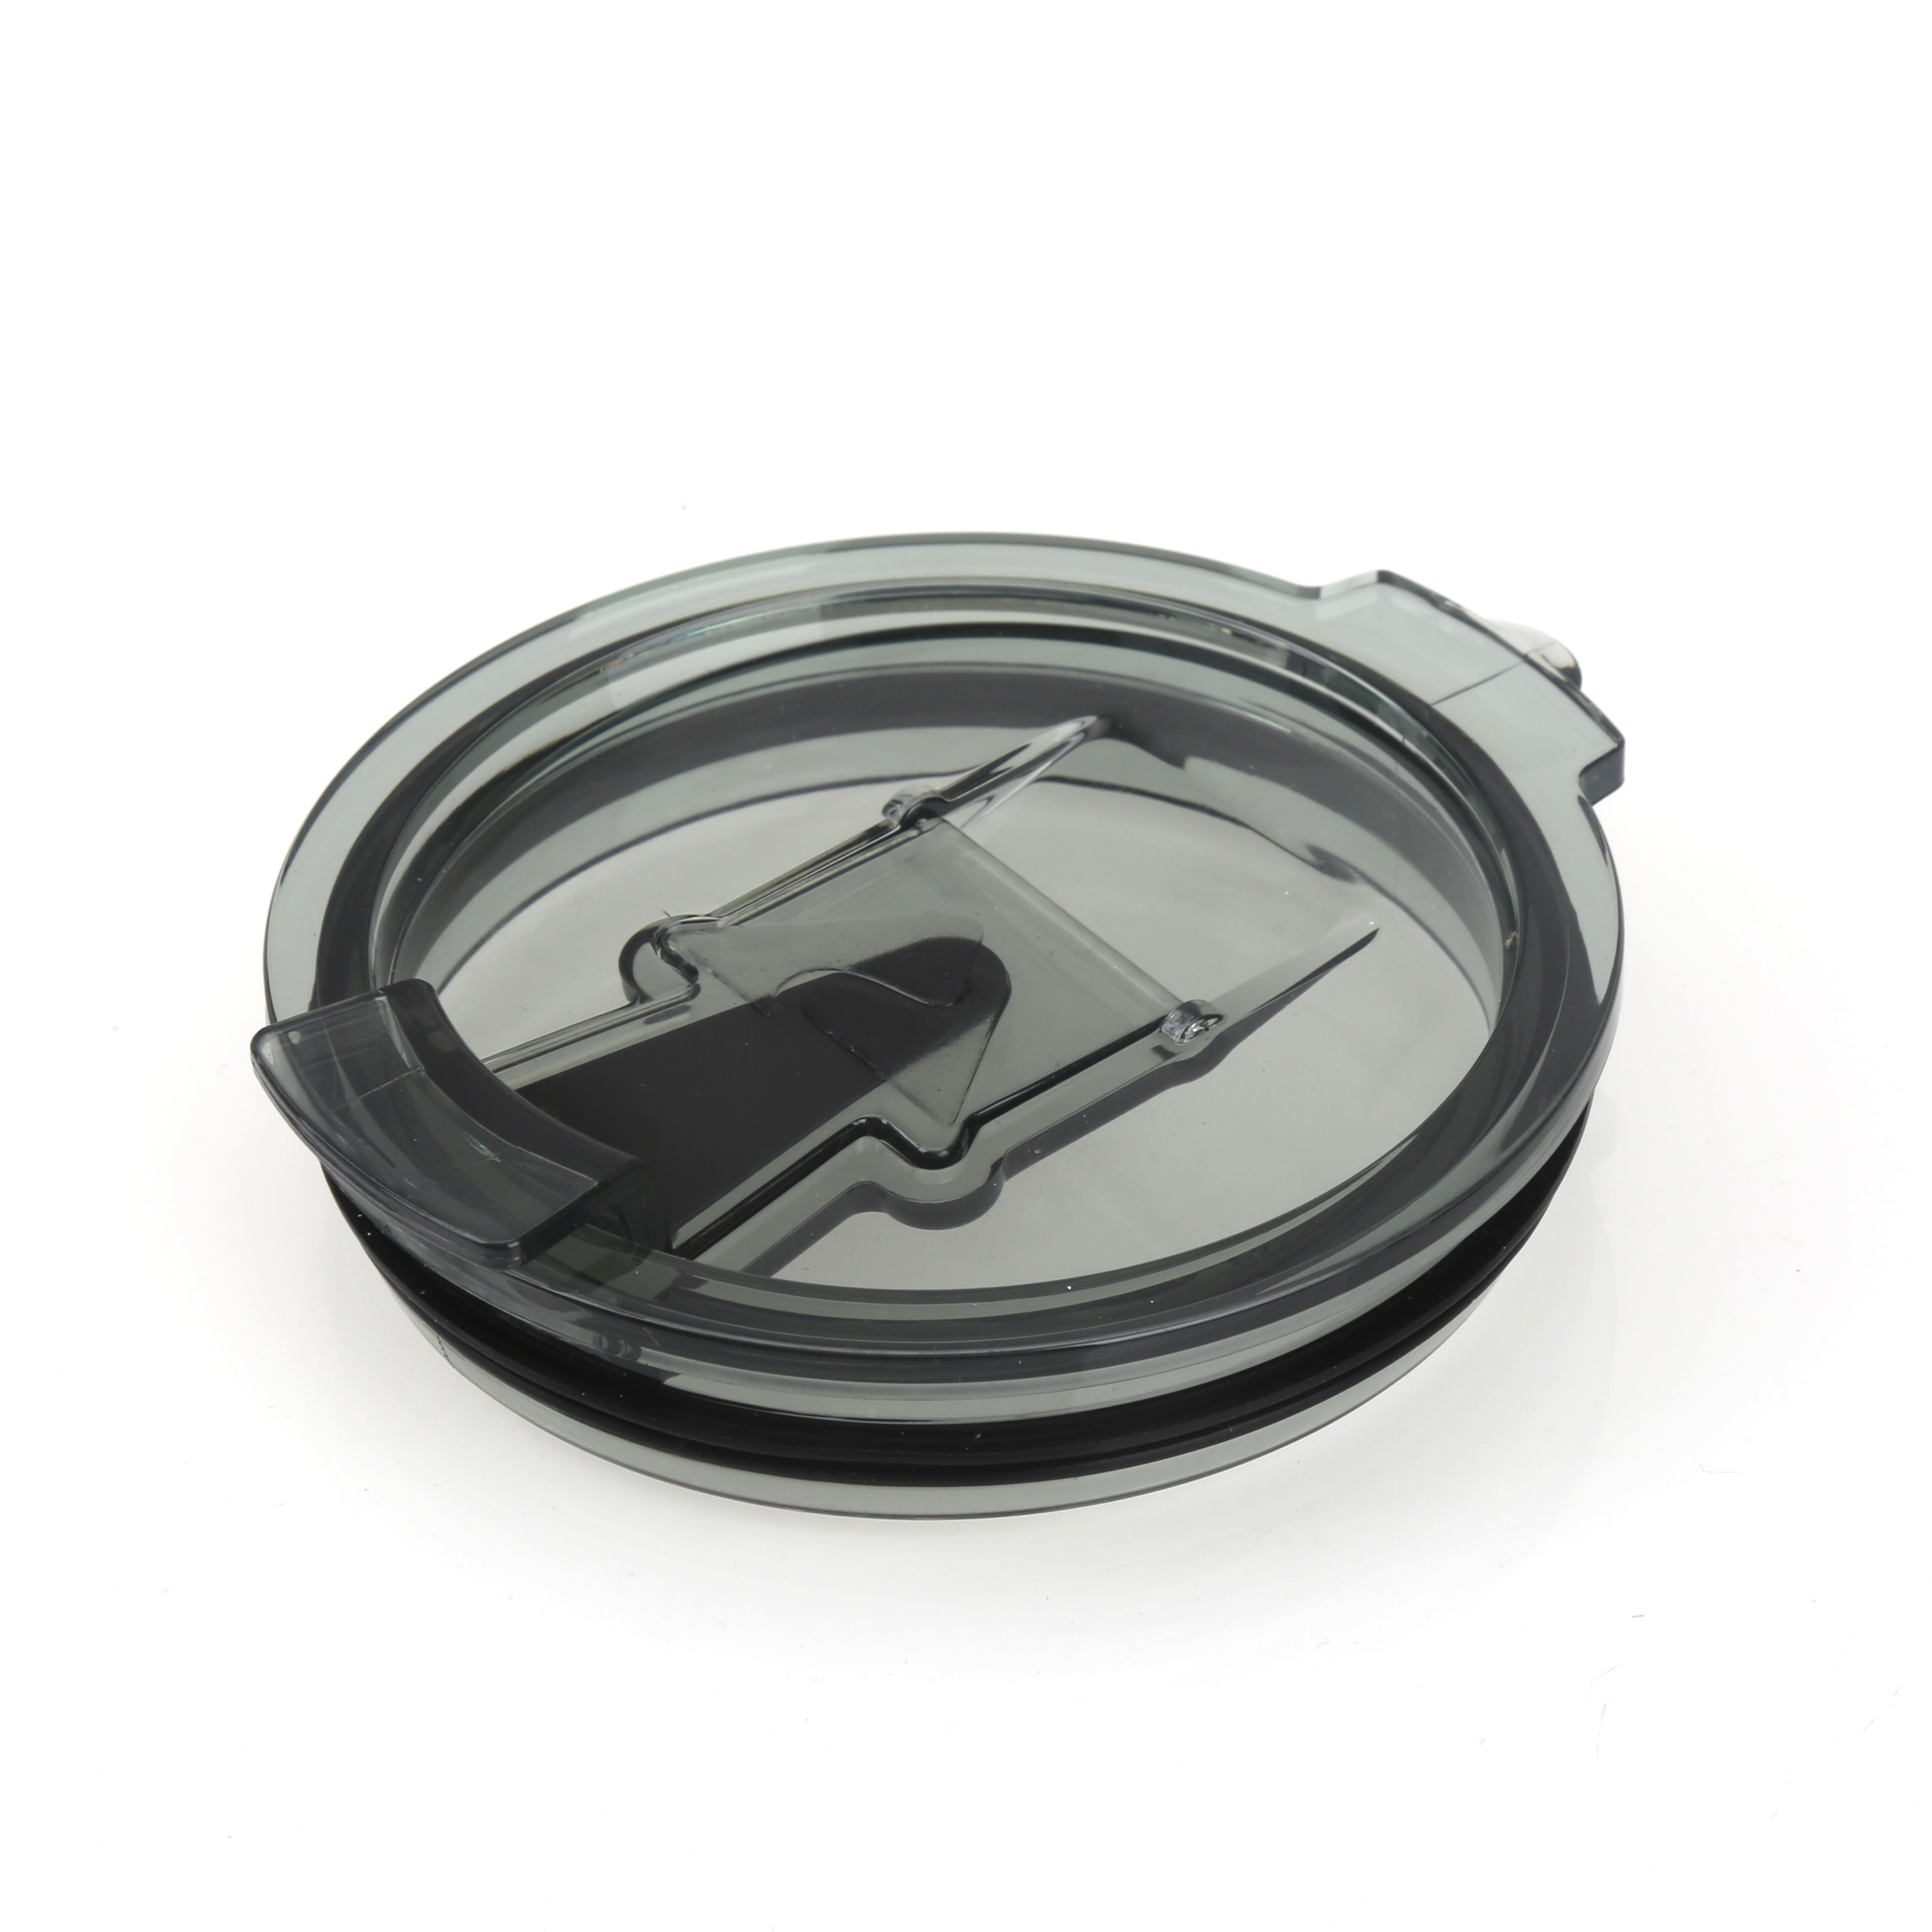 Ozark Trail 20 Oz. Leakproof Replacement Lid - image 5 of 7